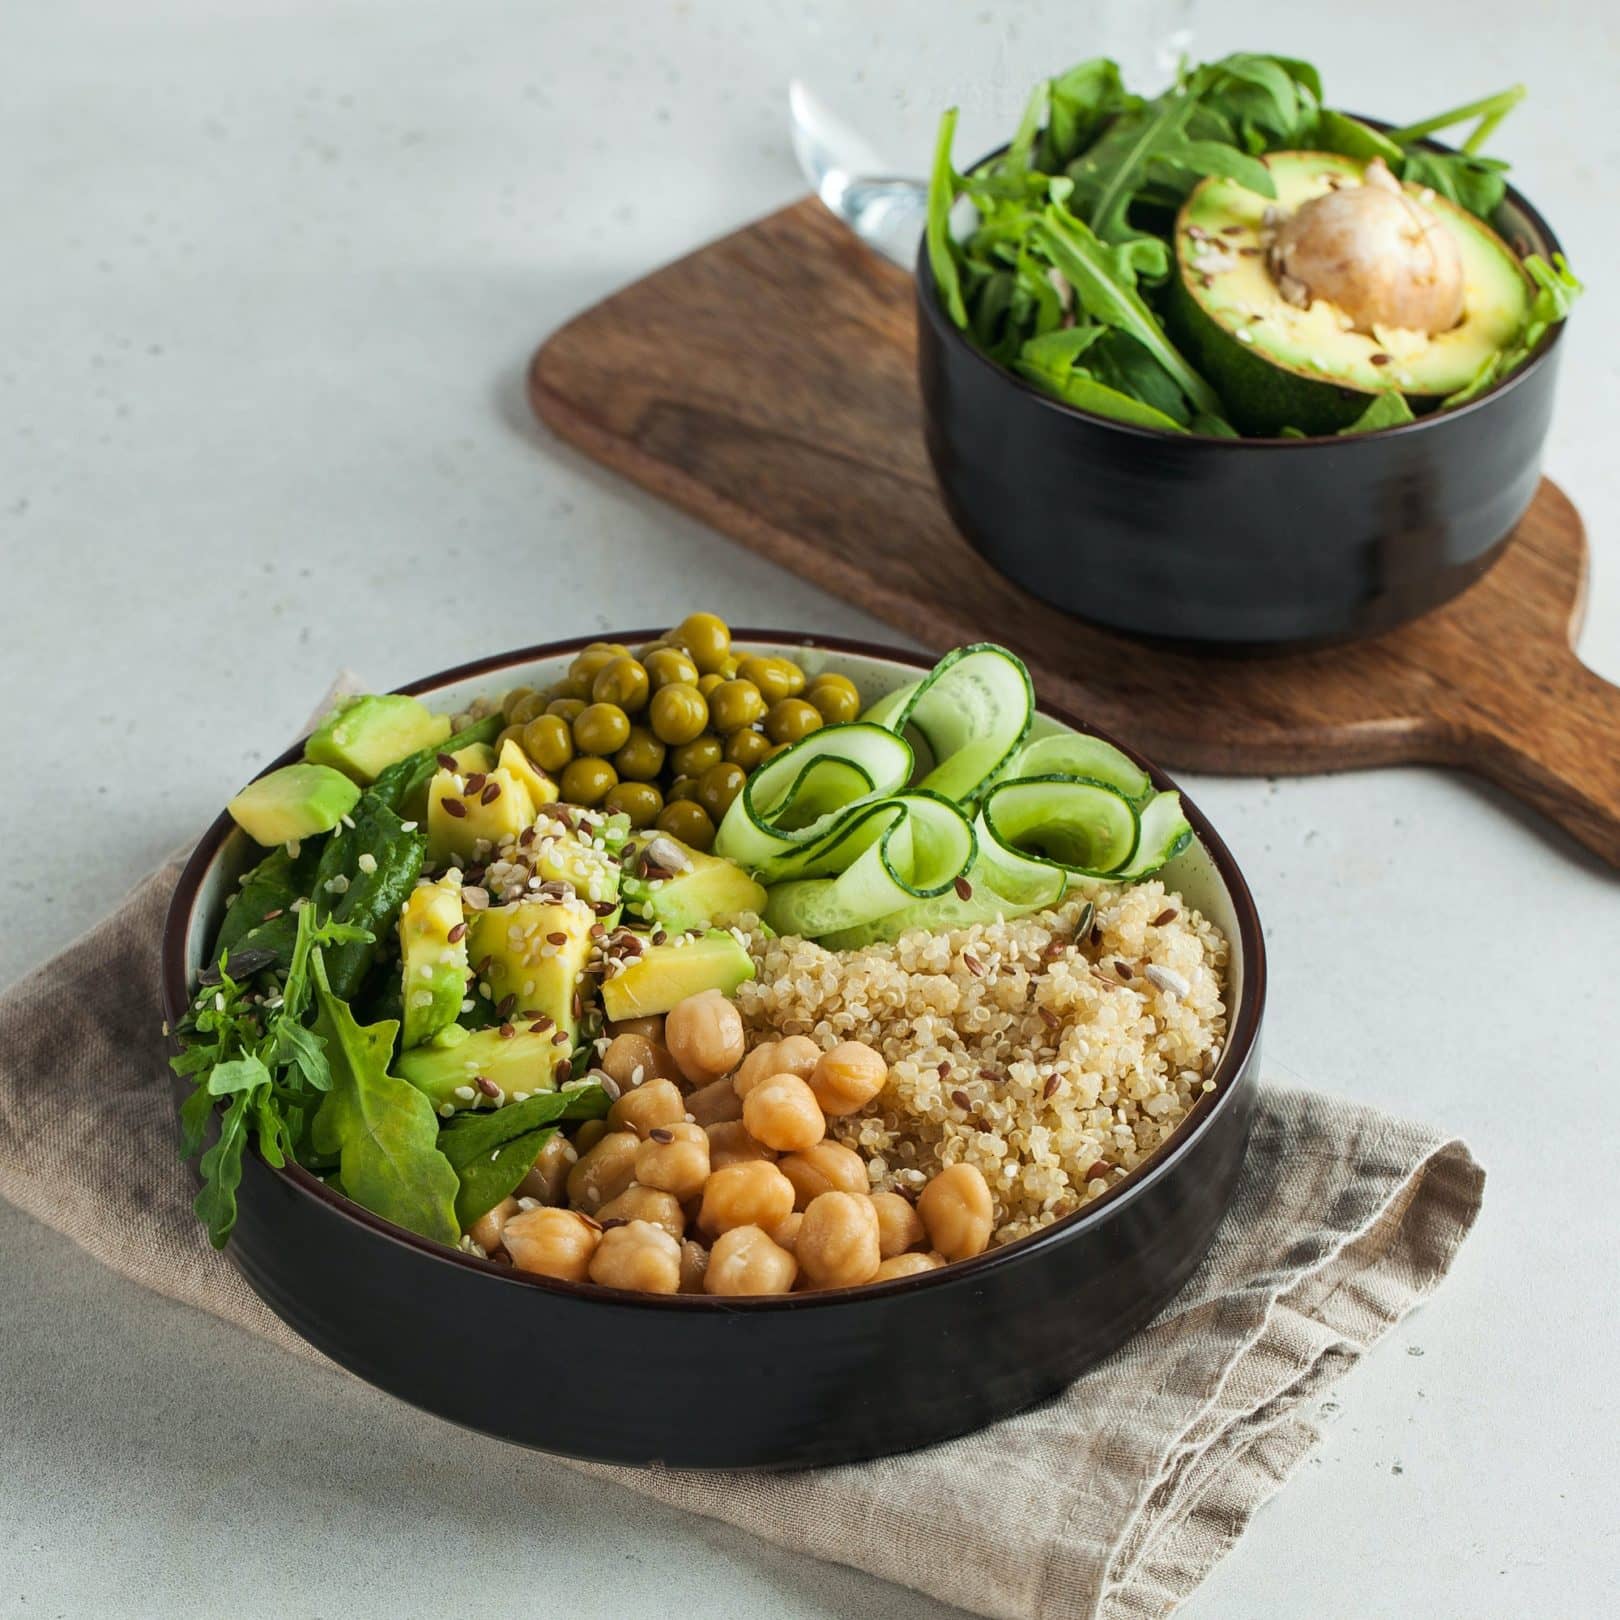 Healthy vegetable lunch from the Buddha bowl with quinoa, avocado, chickpeas.